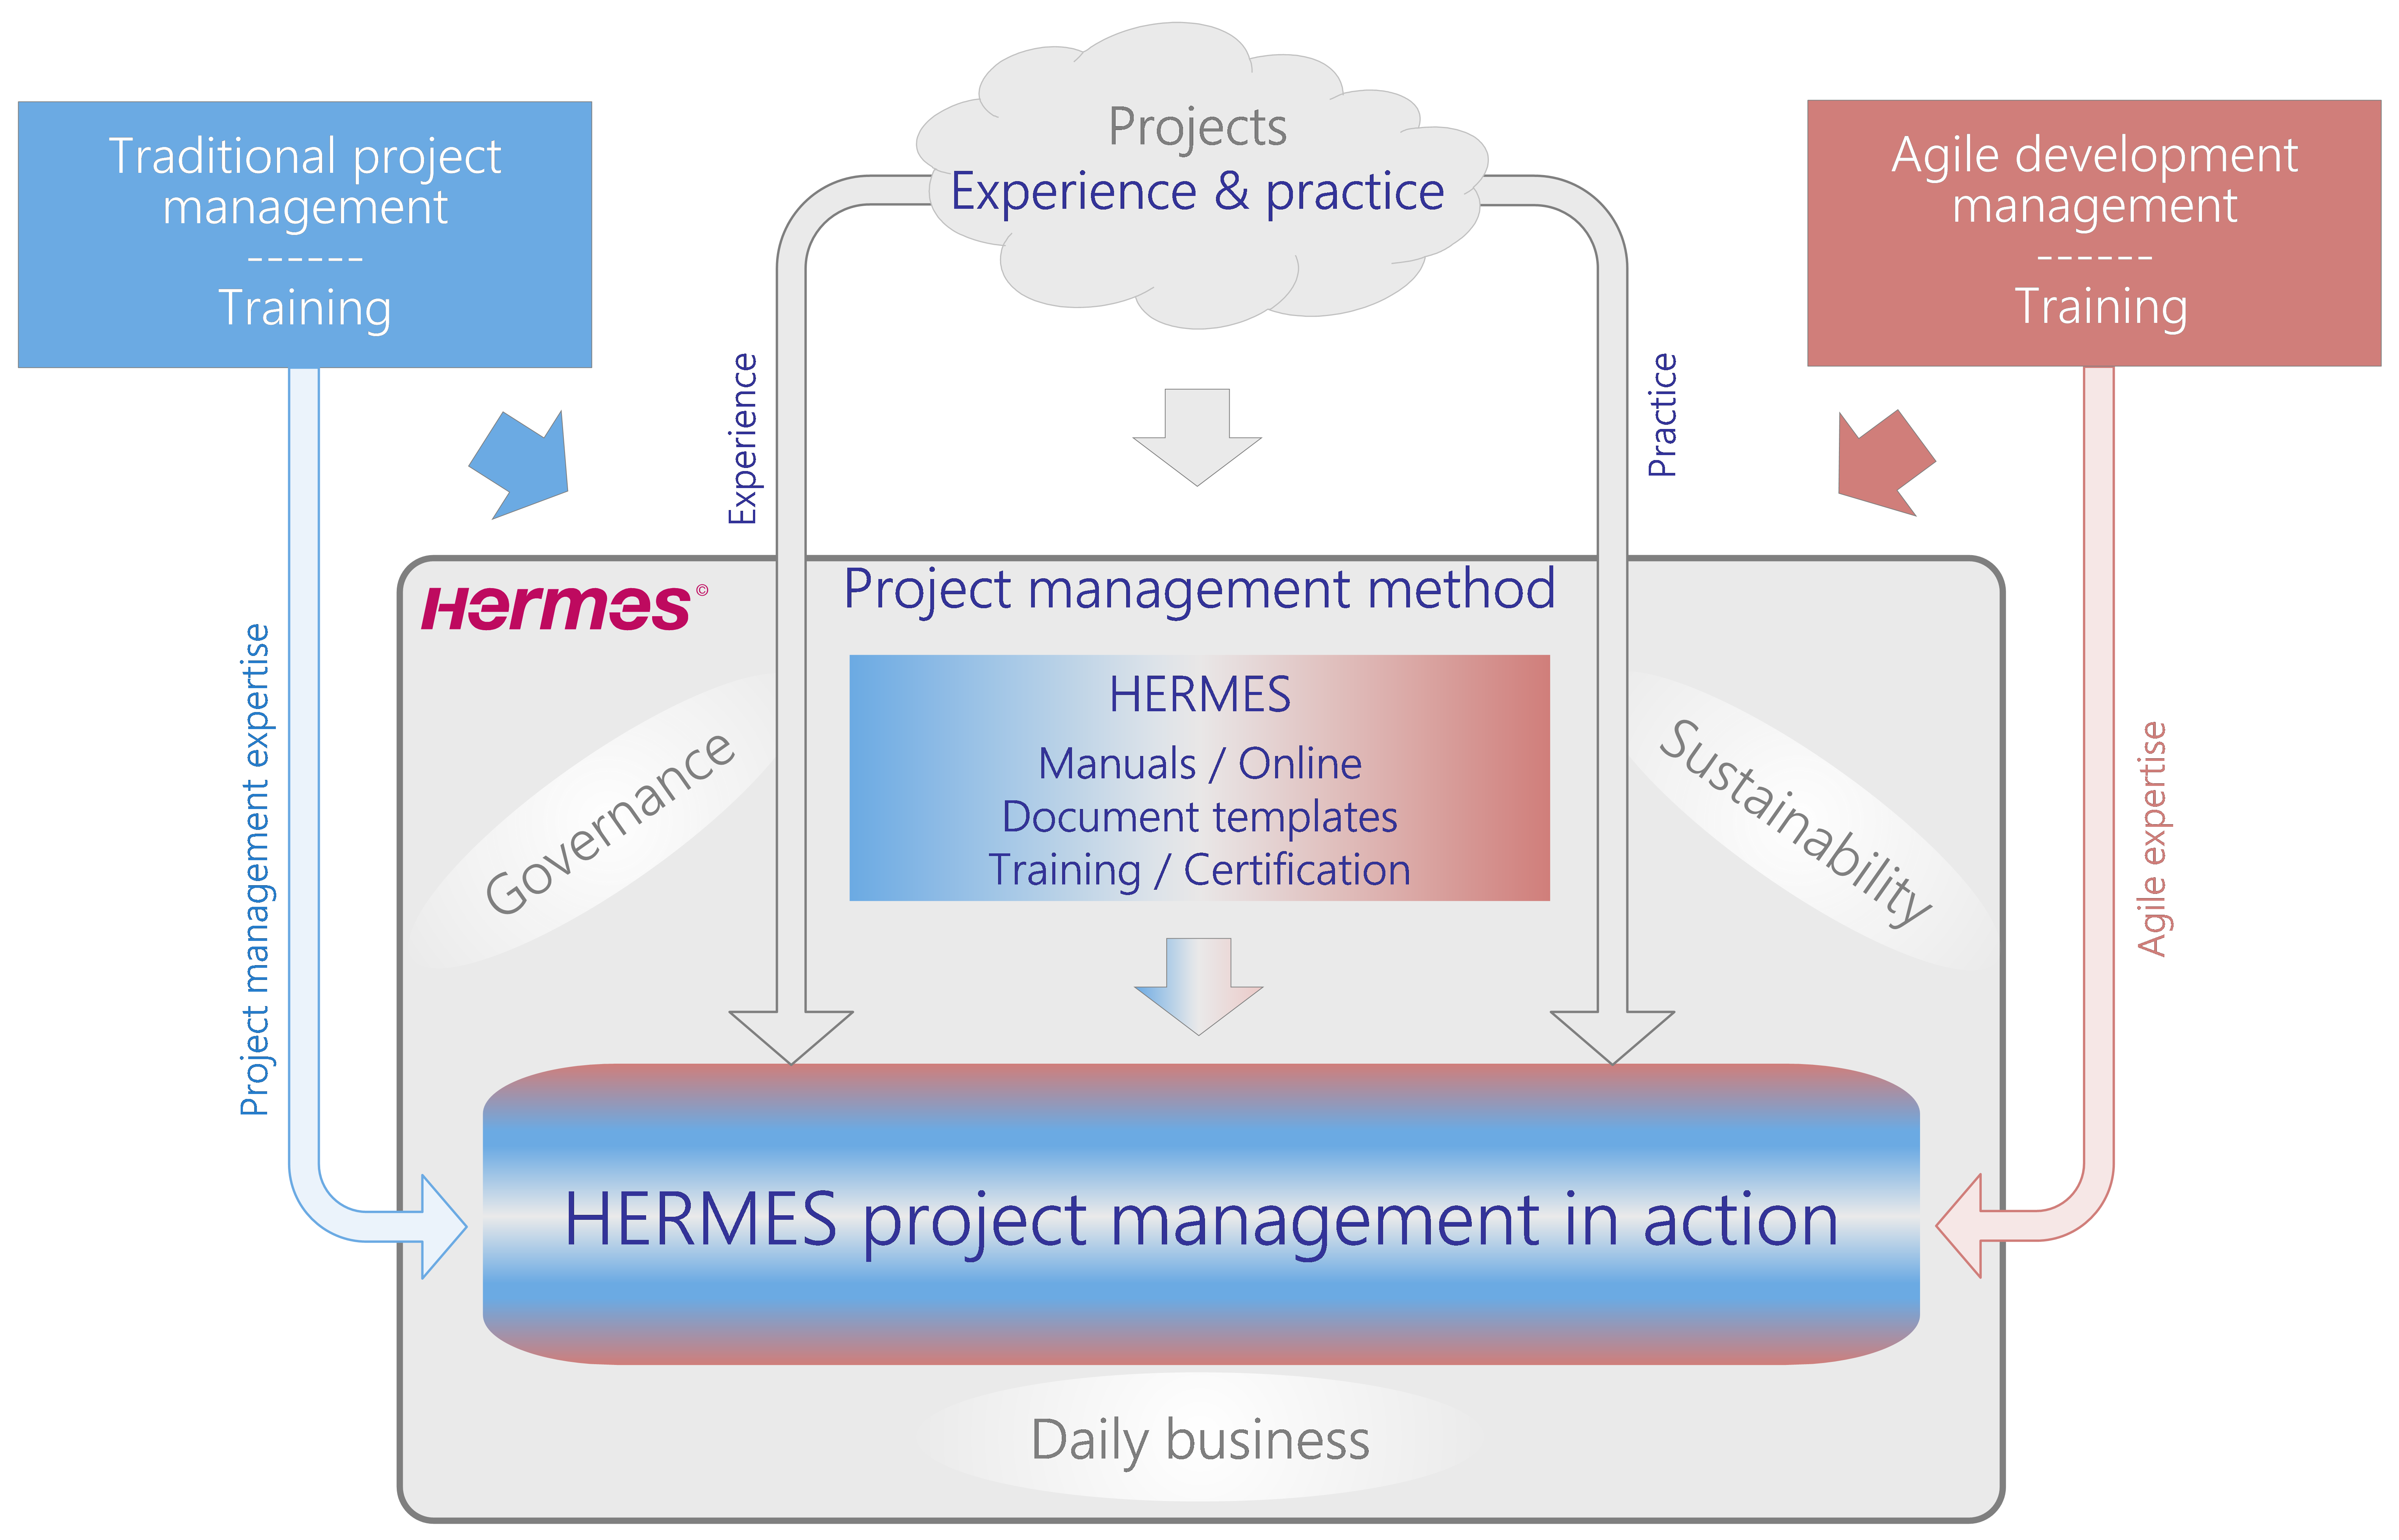 Figure 3: How HERMES project management works in practice